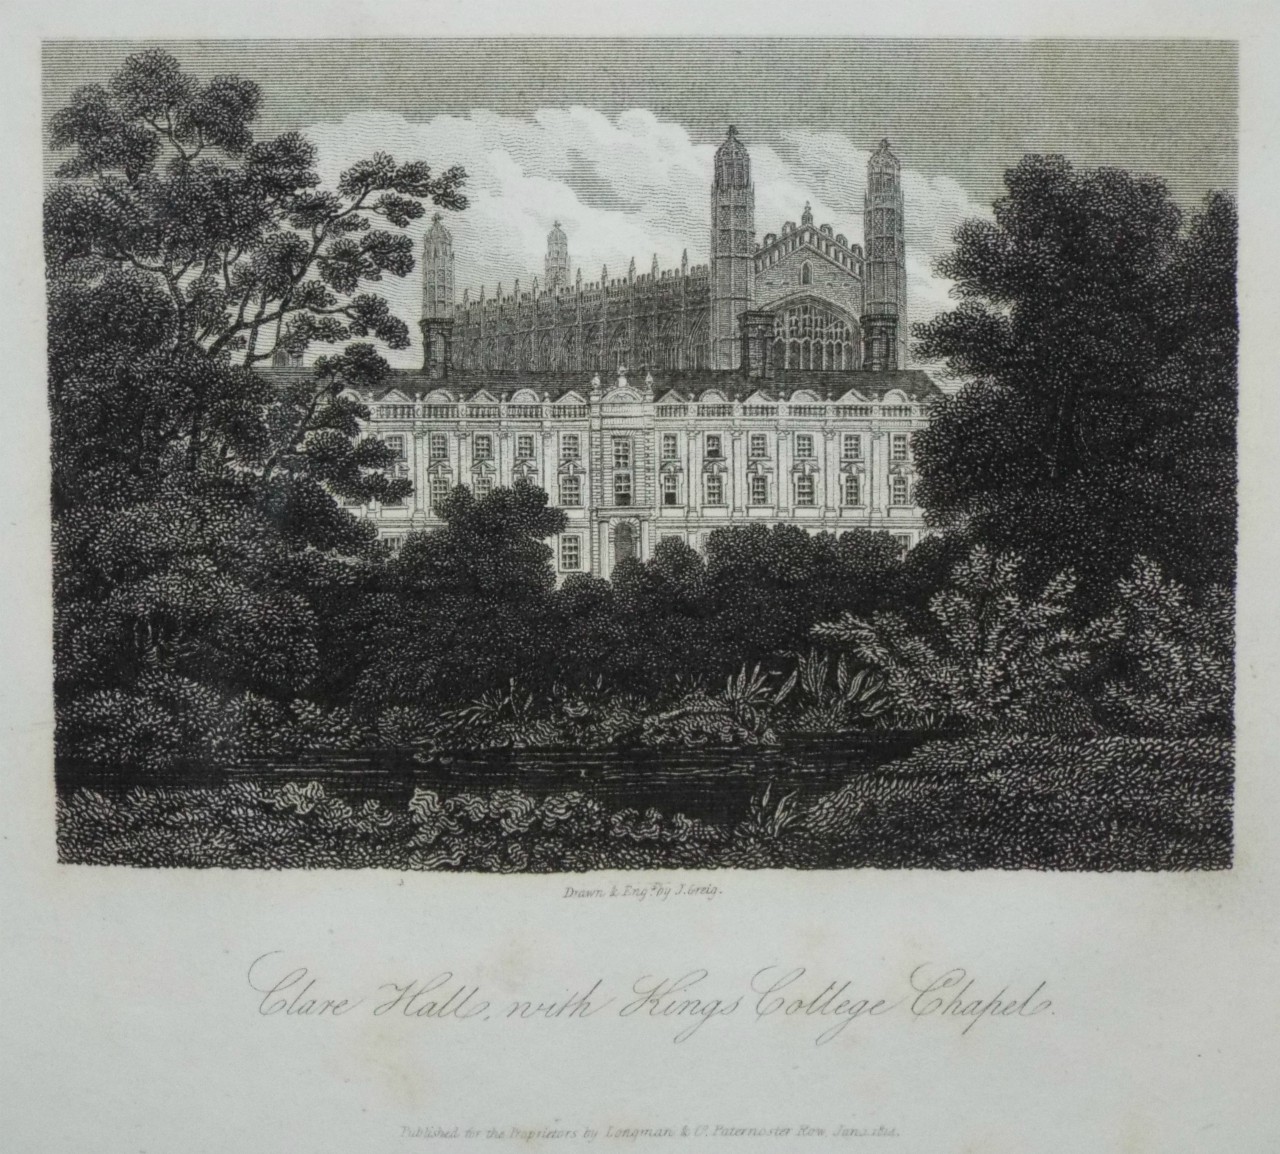 Print - Clare Hall, with King's College Chapel. - Greig